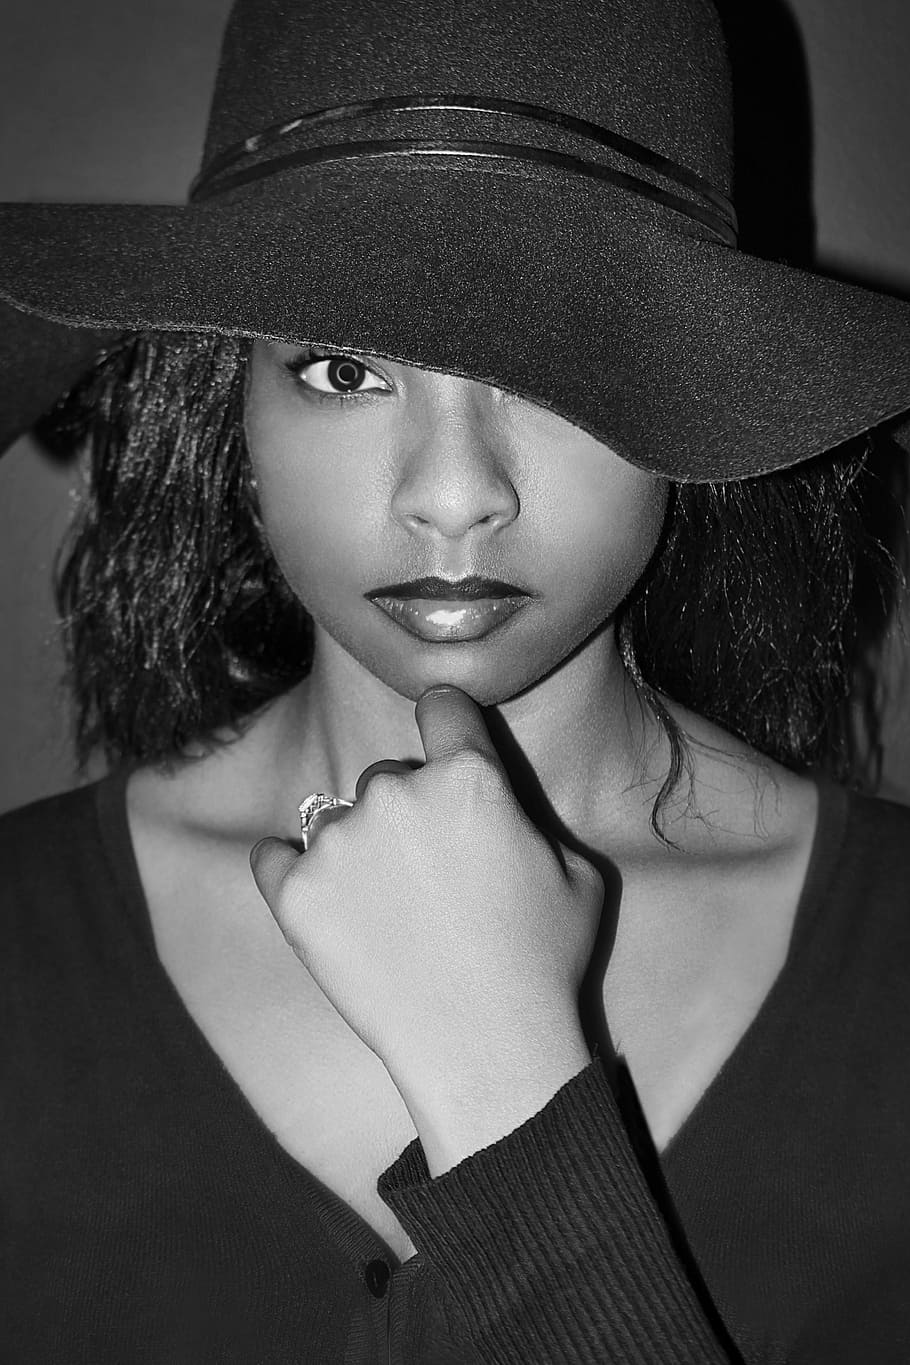 Hd Wallpaper Woman Wearing Hat And V Neck Shirt Grayscale Photo Grayscale Photography Of Woman